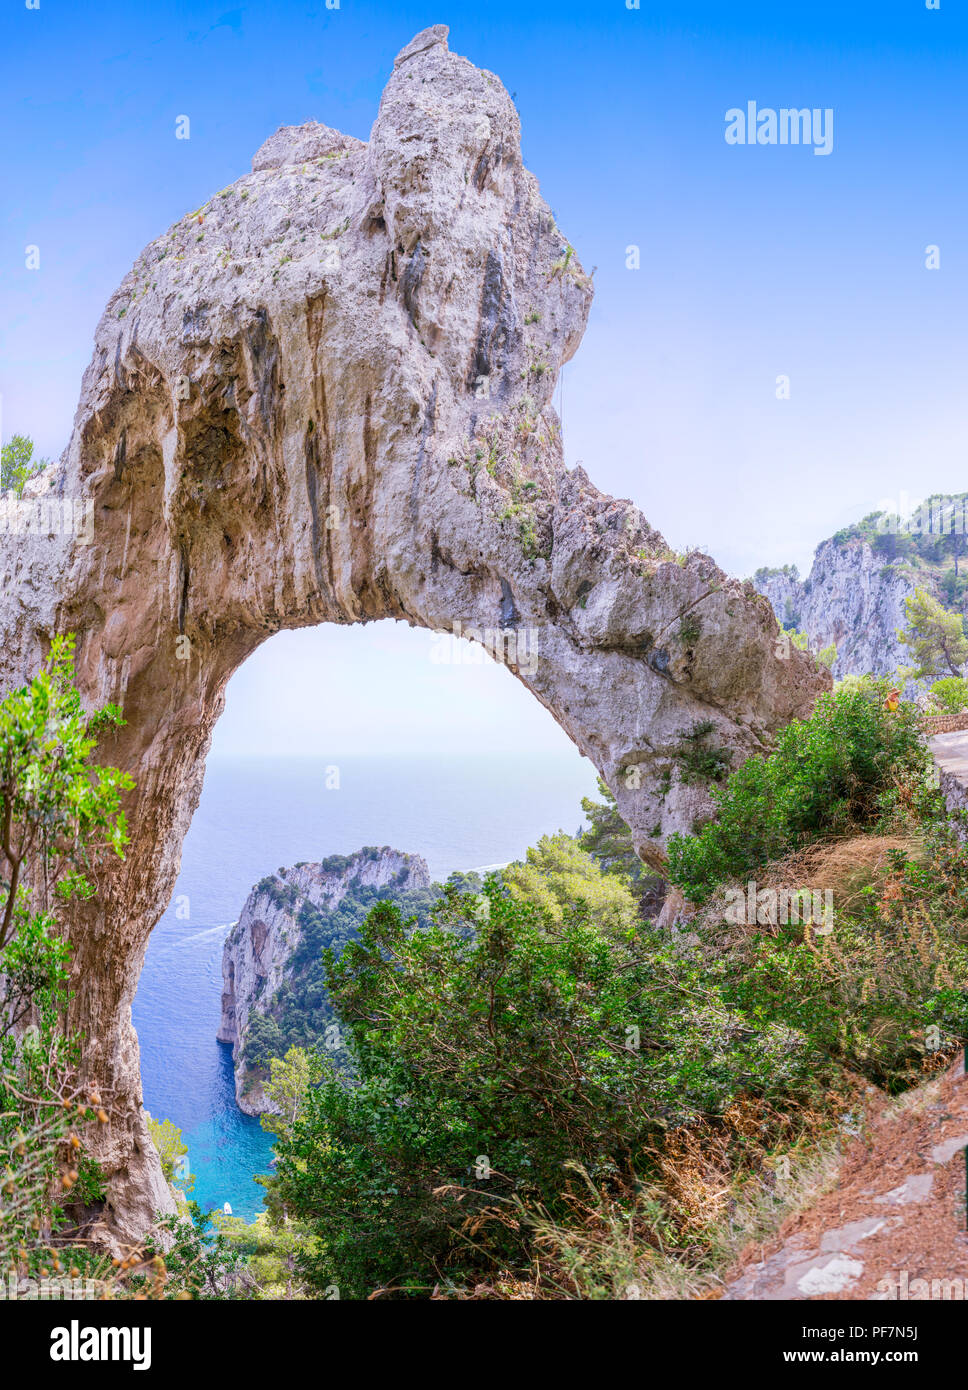 The Arco Naturale (Arch Natural) on Capri, Italy, as viewed from